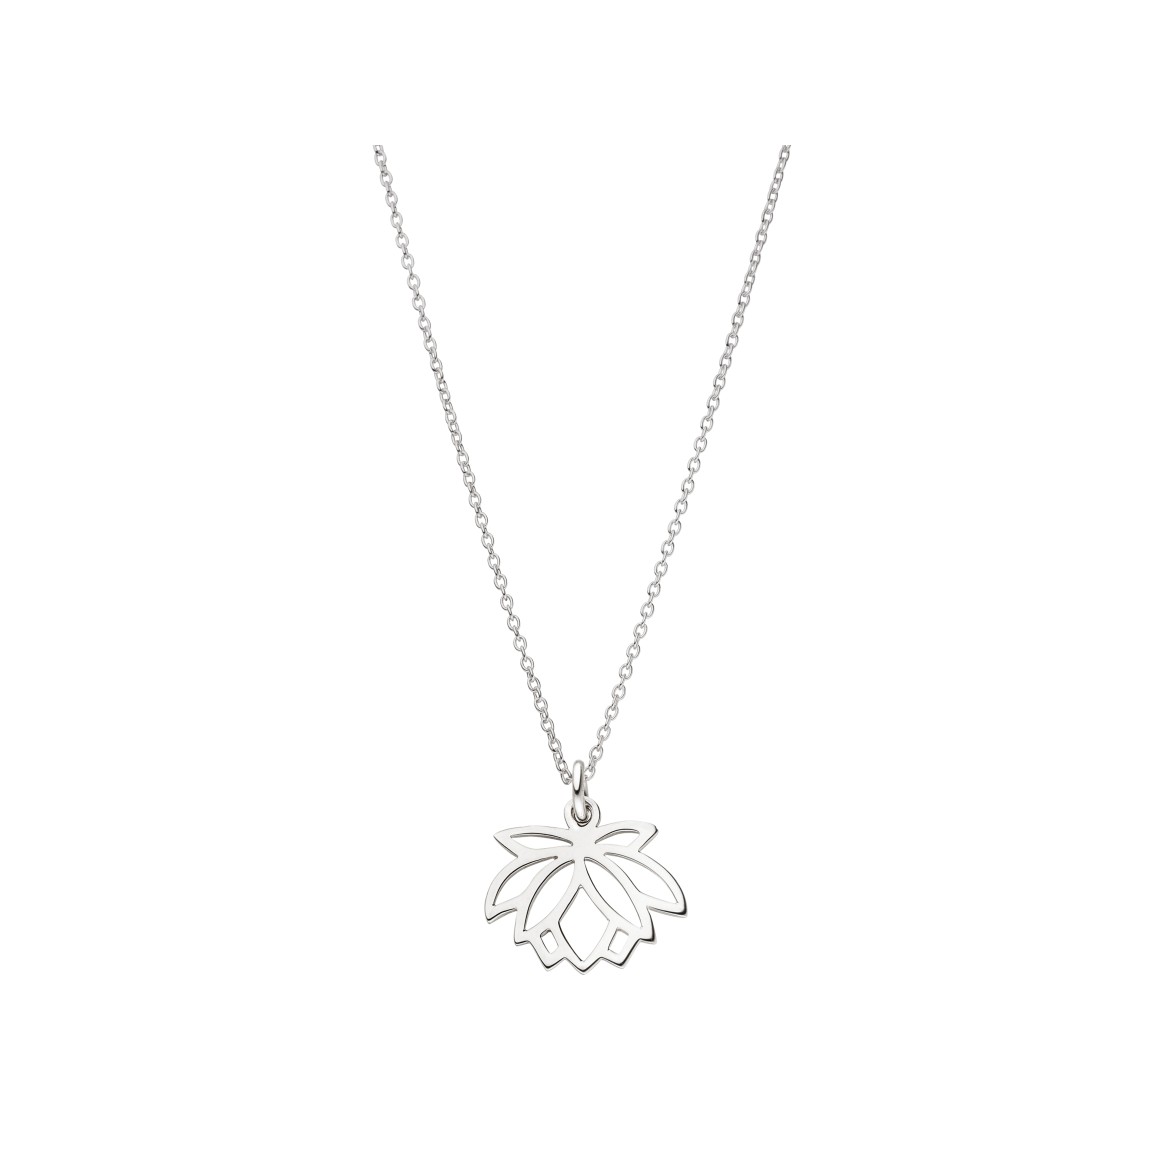 lotus flower necklace sterling silver